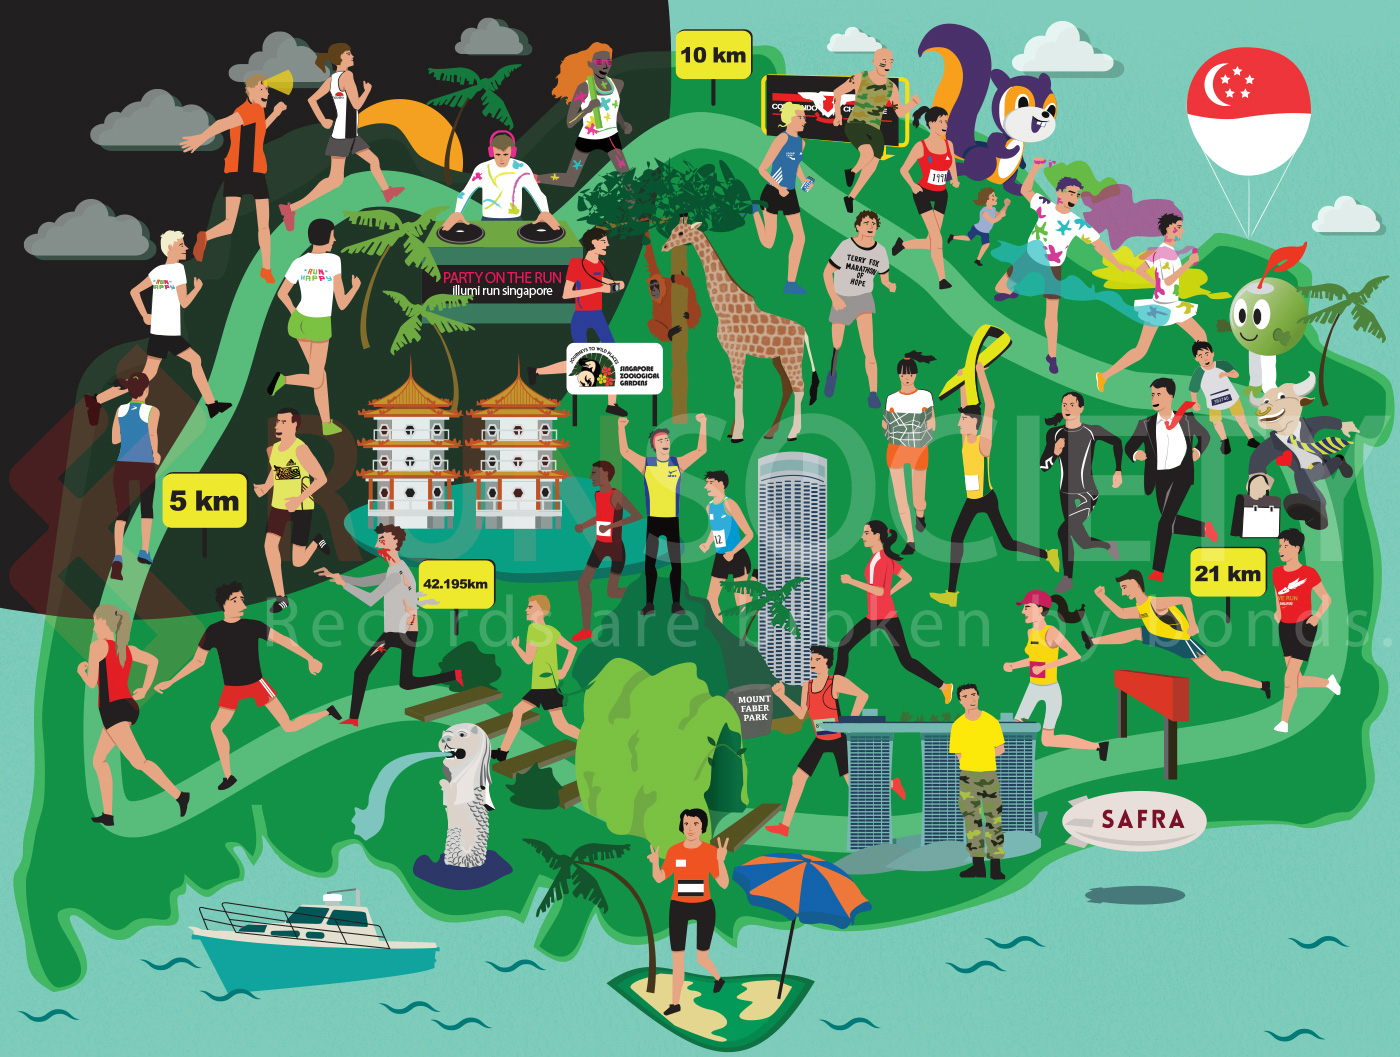 Singapore Popular Running Events at a Glance Visual.ly